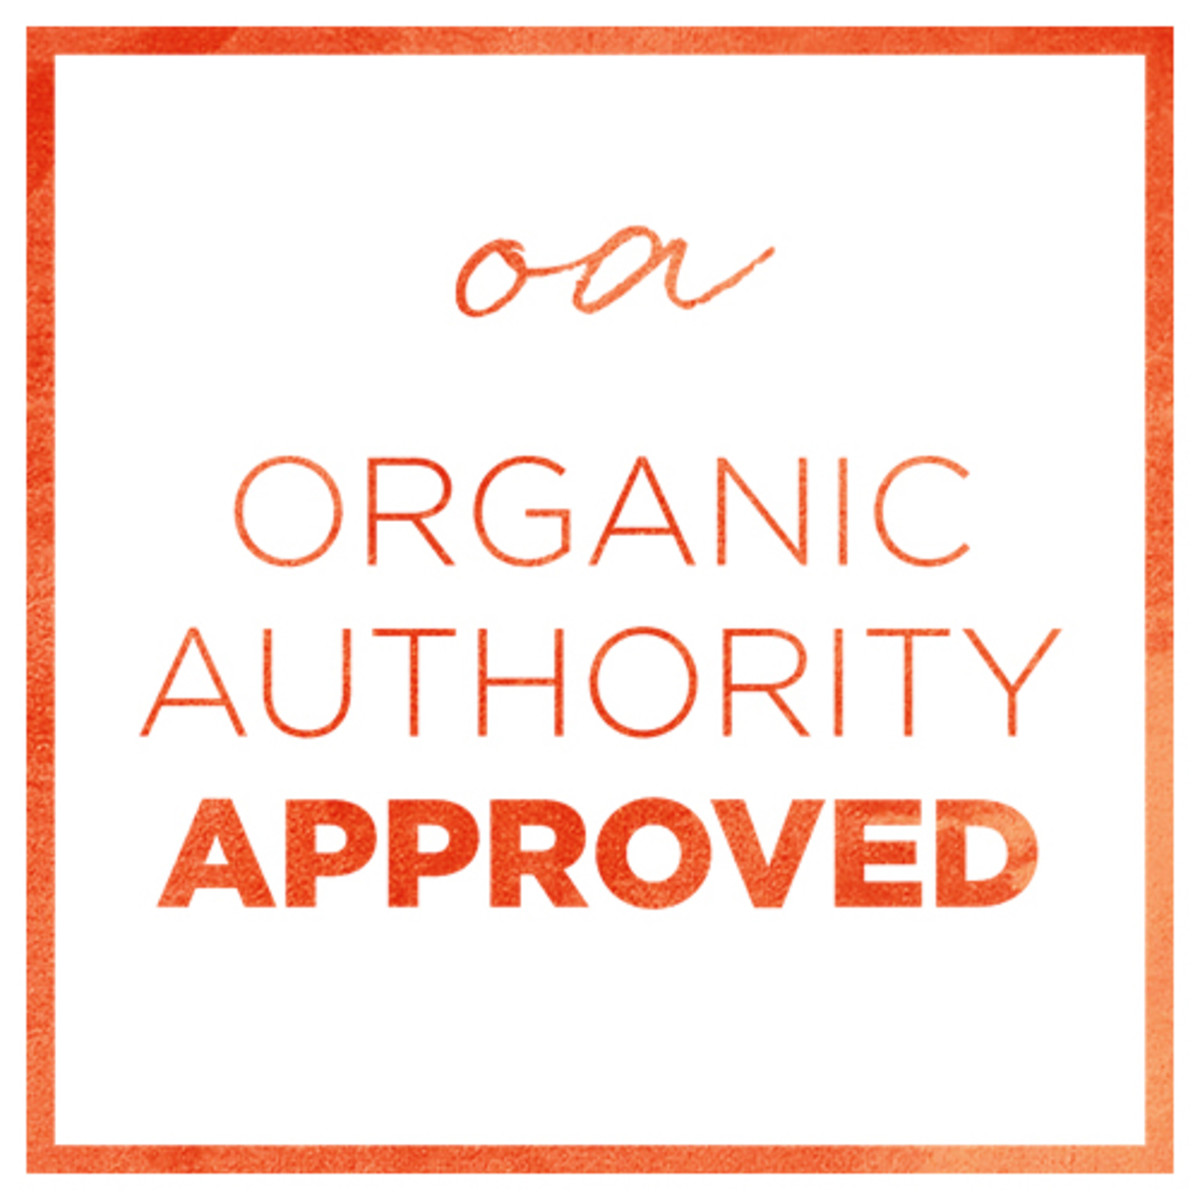 Every product we feature on Organic Authority is Organic Authority Approved. 